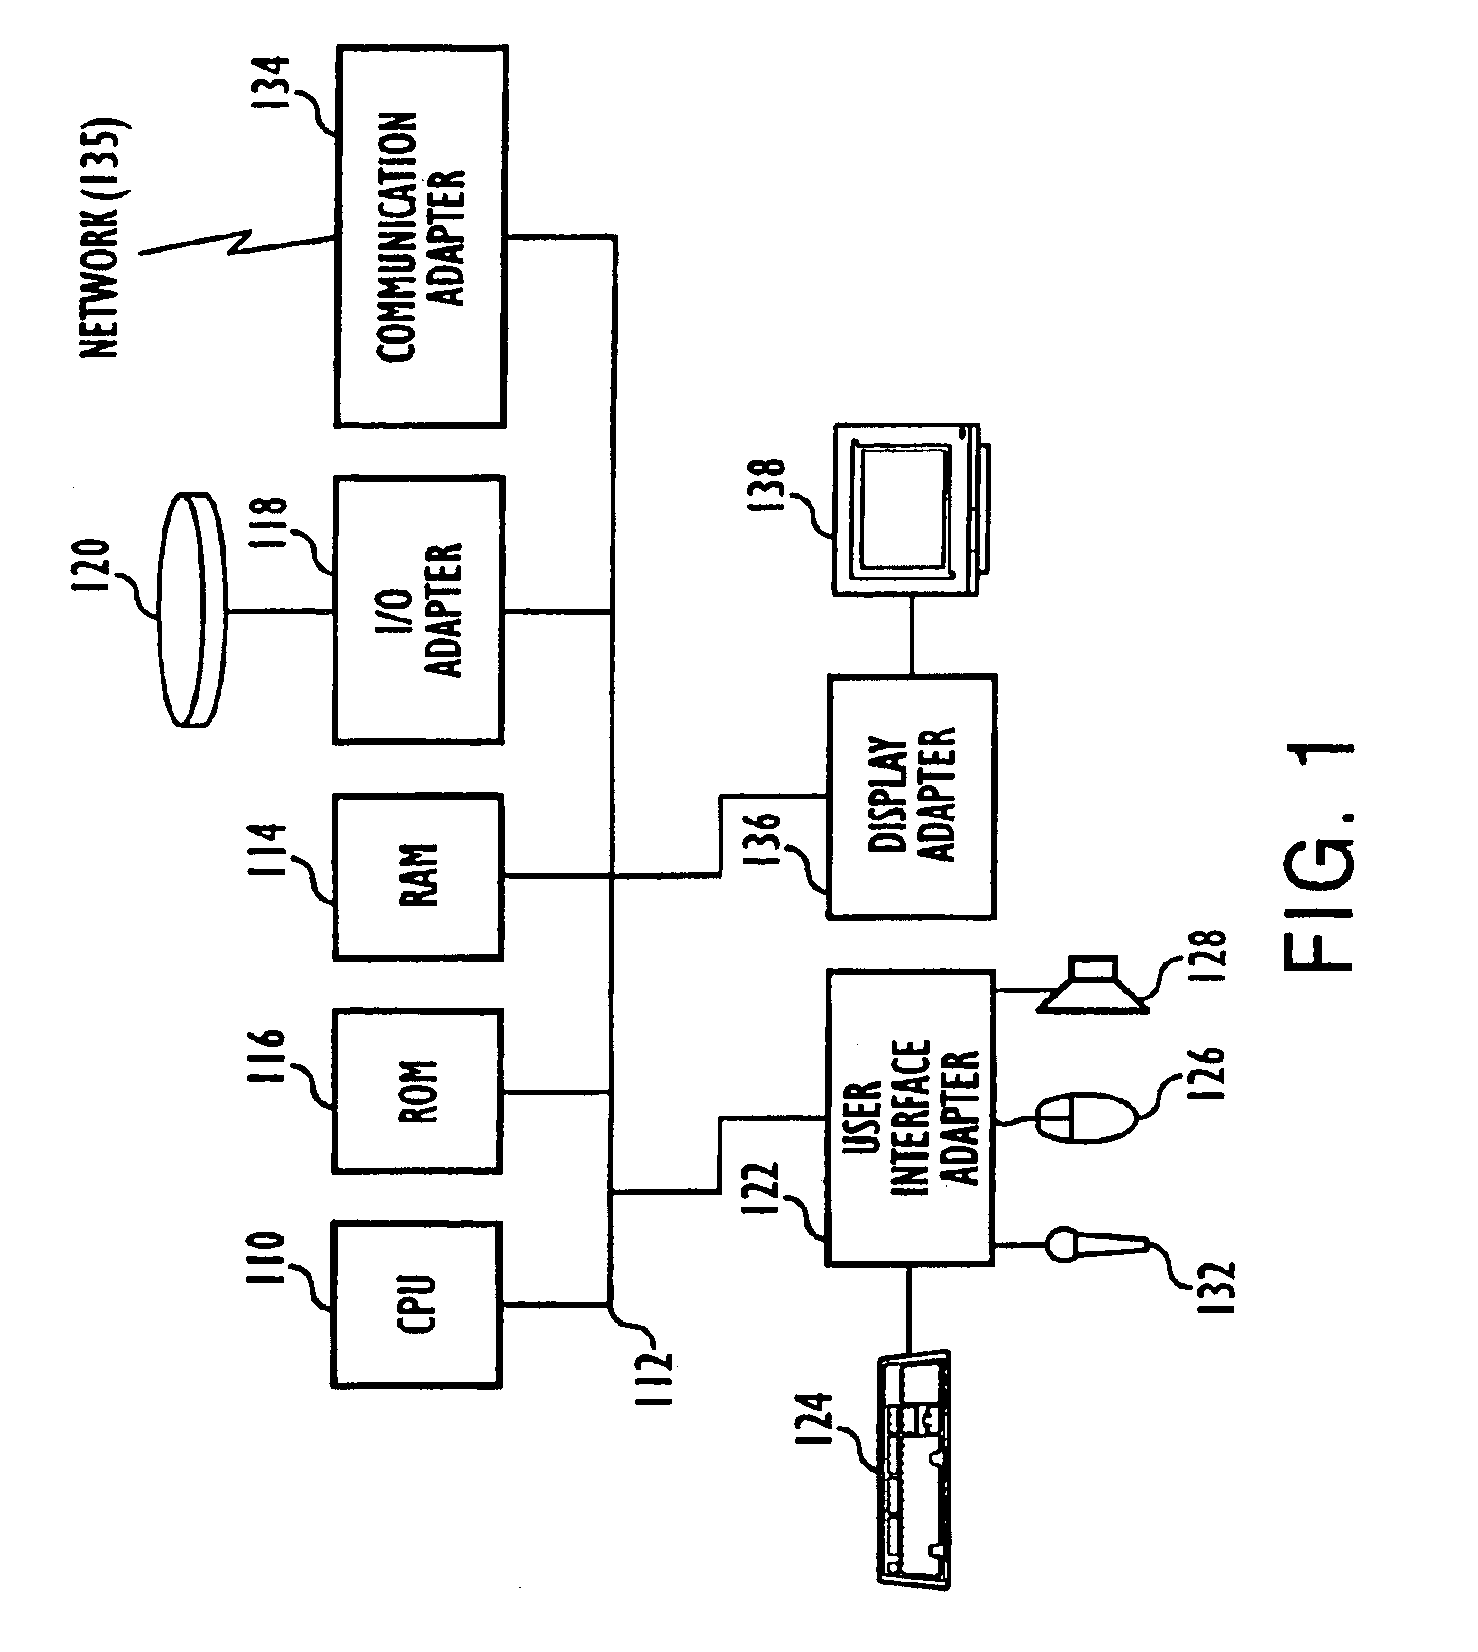 Goal based educational system with support for dynamic characteristic tuning